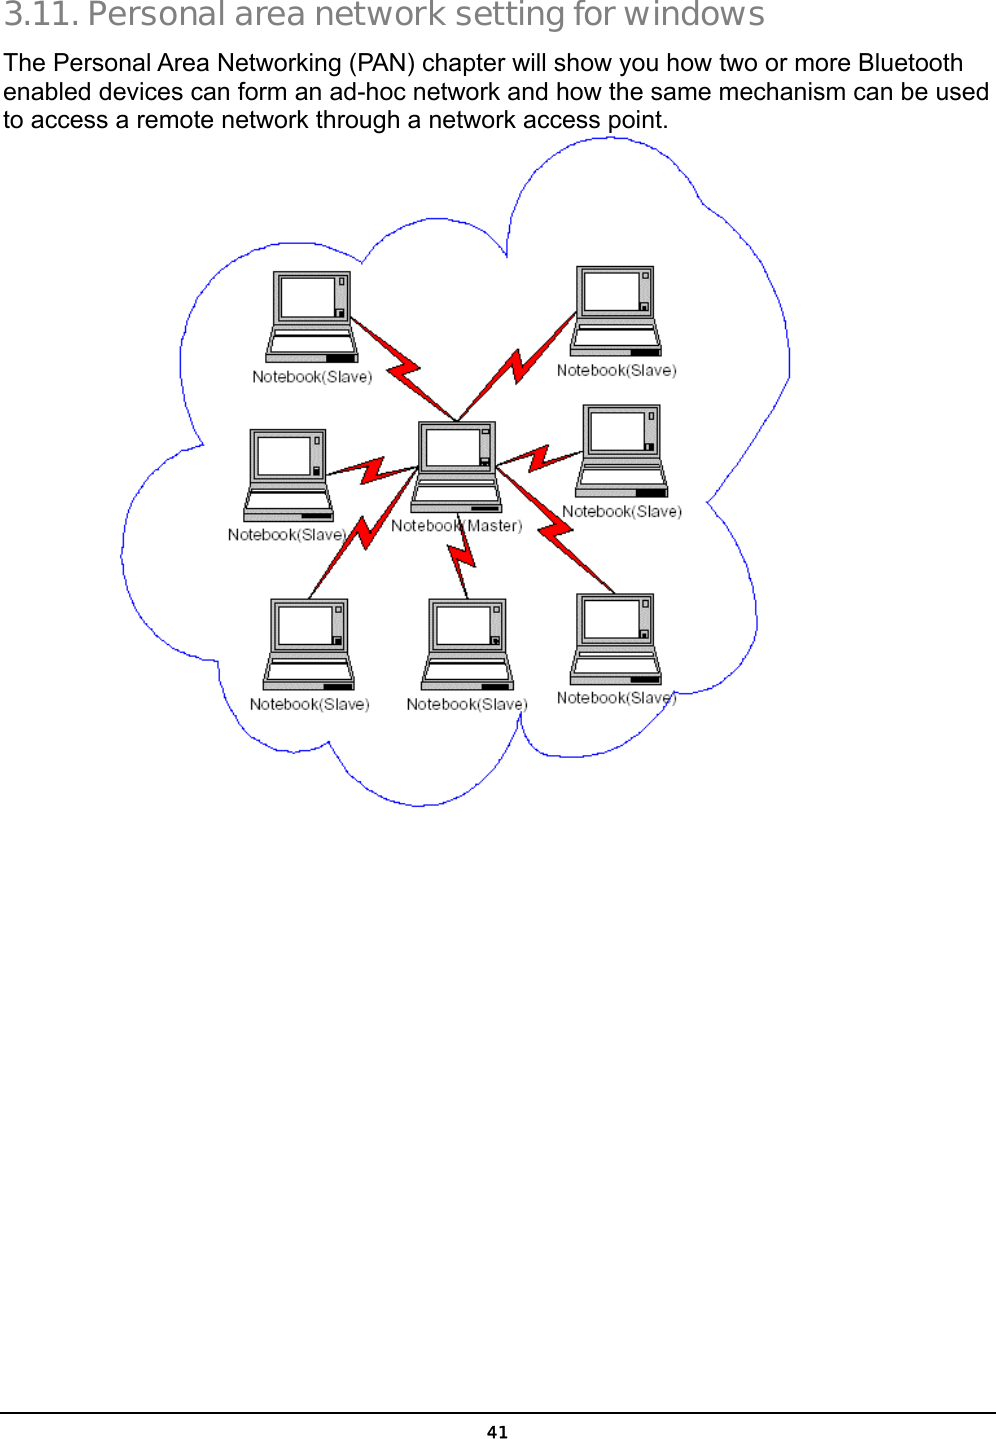  41 3.11. Personal area network setting for windows   The Personal Area Networking (PAN) chapter will show you how two or more Bluetooth enabled devices can form an ad-hoc network and how the same mechanism can be used to access a remote network through a network access point.   